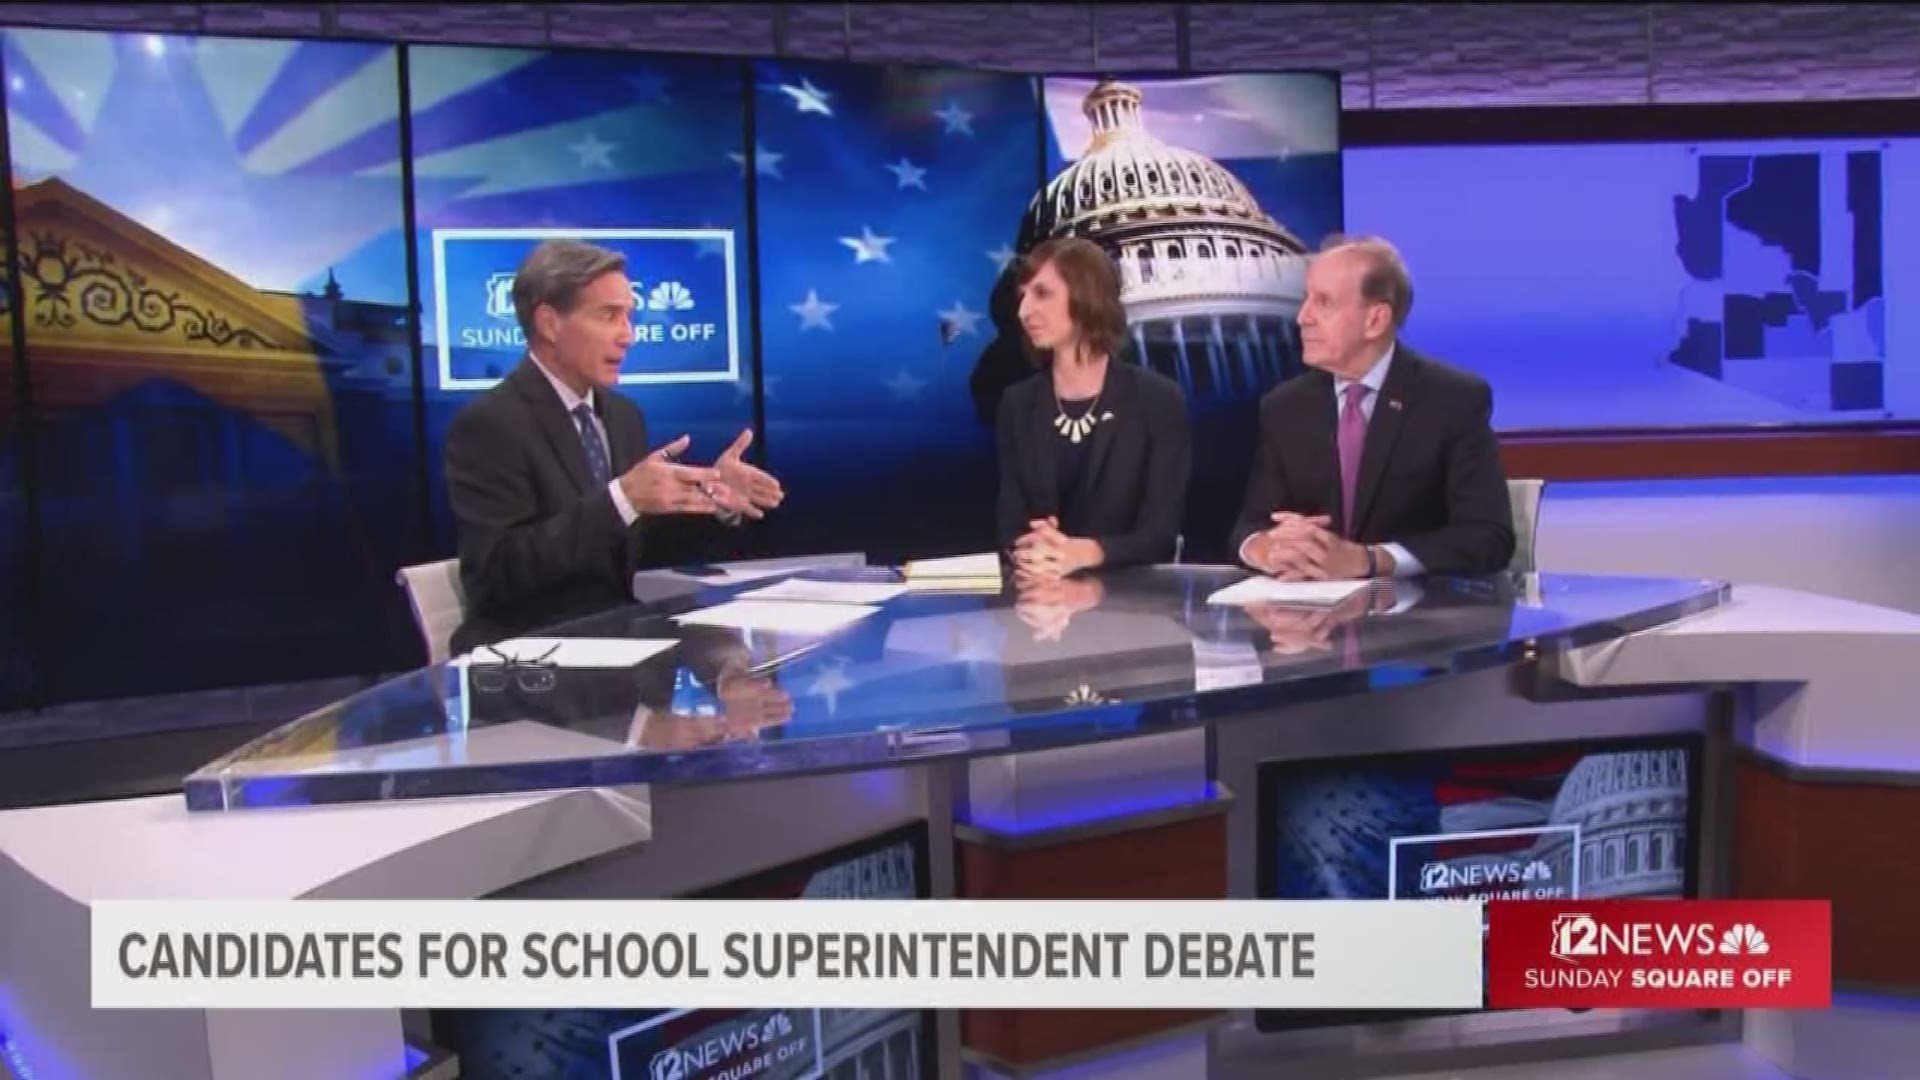 Do the candidates for Arizona school superintendent support expanding school vouchers or eliminating them?